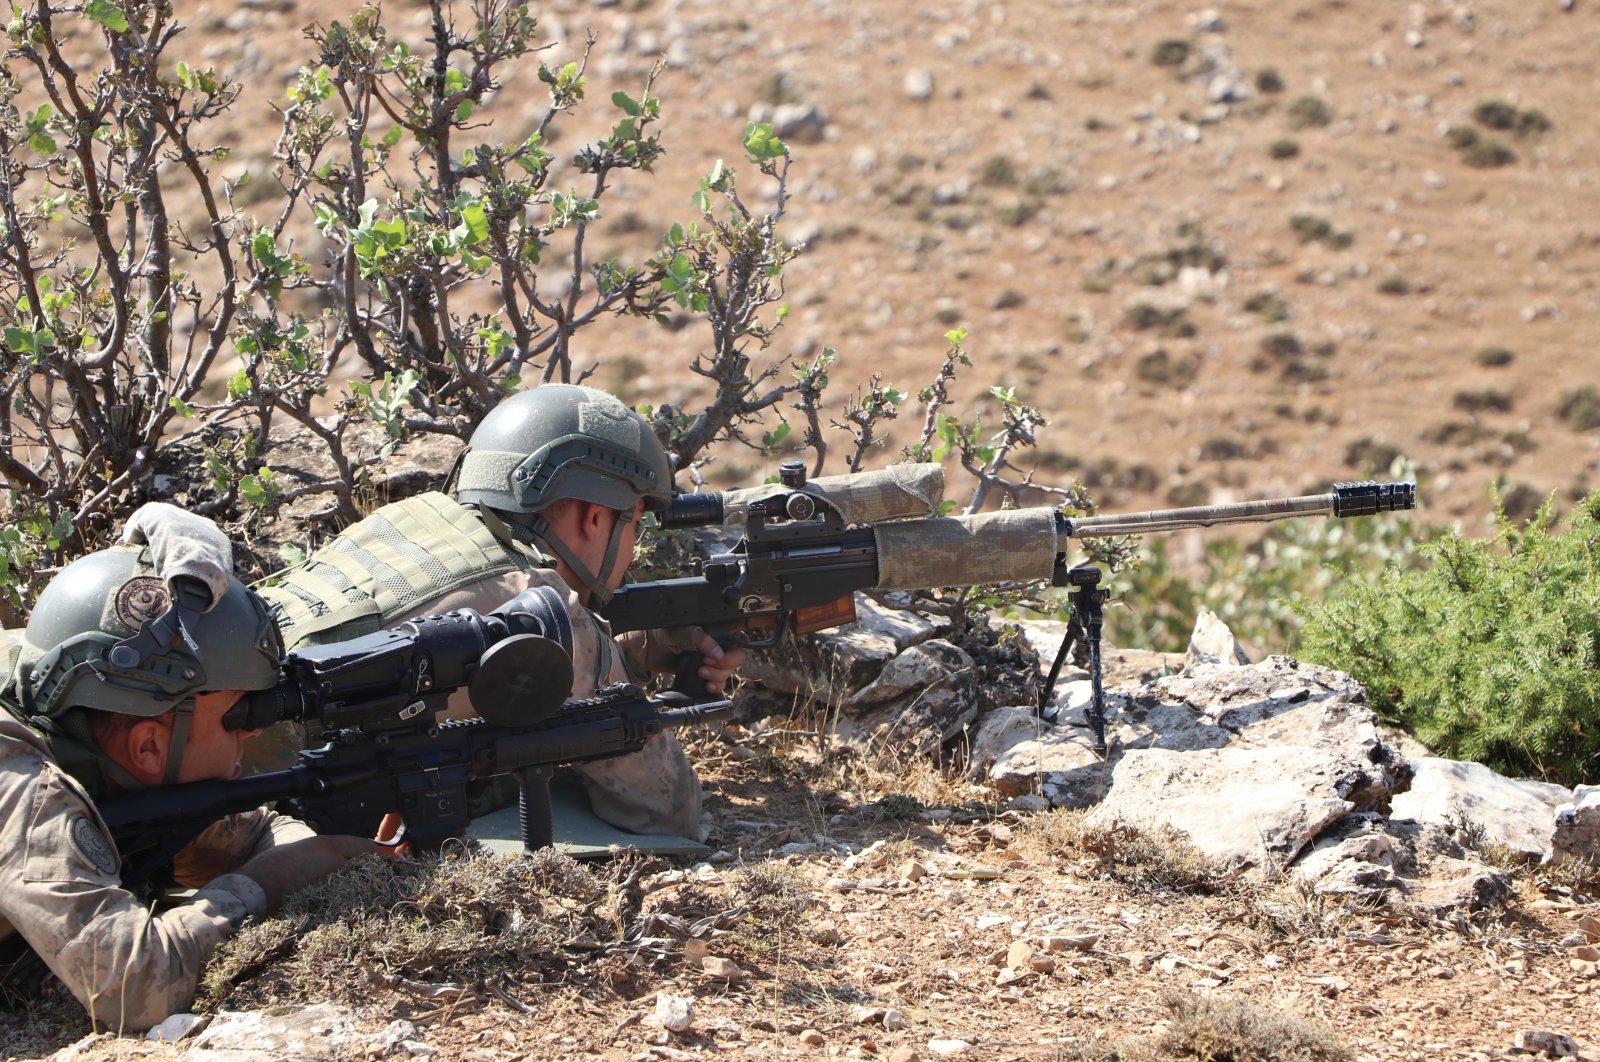 Turkish security forces participate in a counterterrorism operation against the PKK in Siirt, eastern Turkey, Sept. 30, 2019 (DHA Photo)